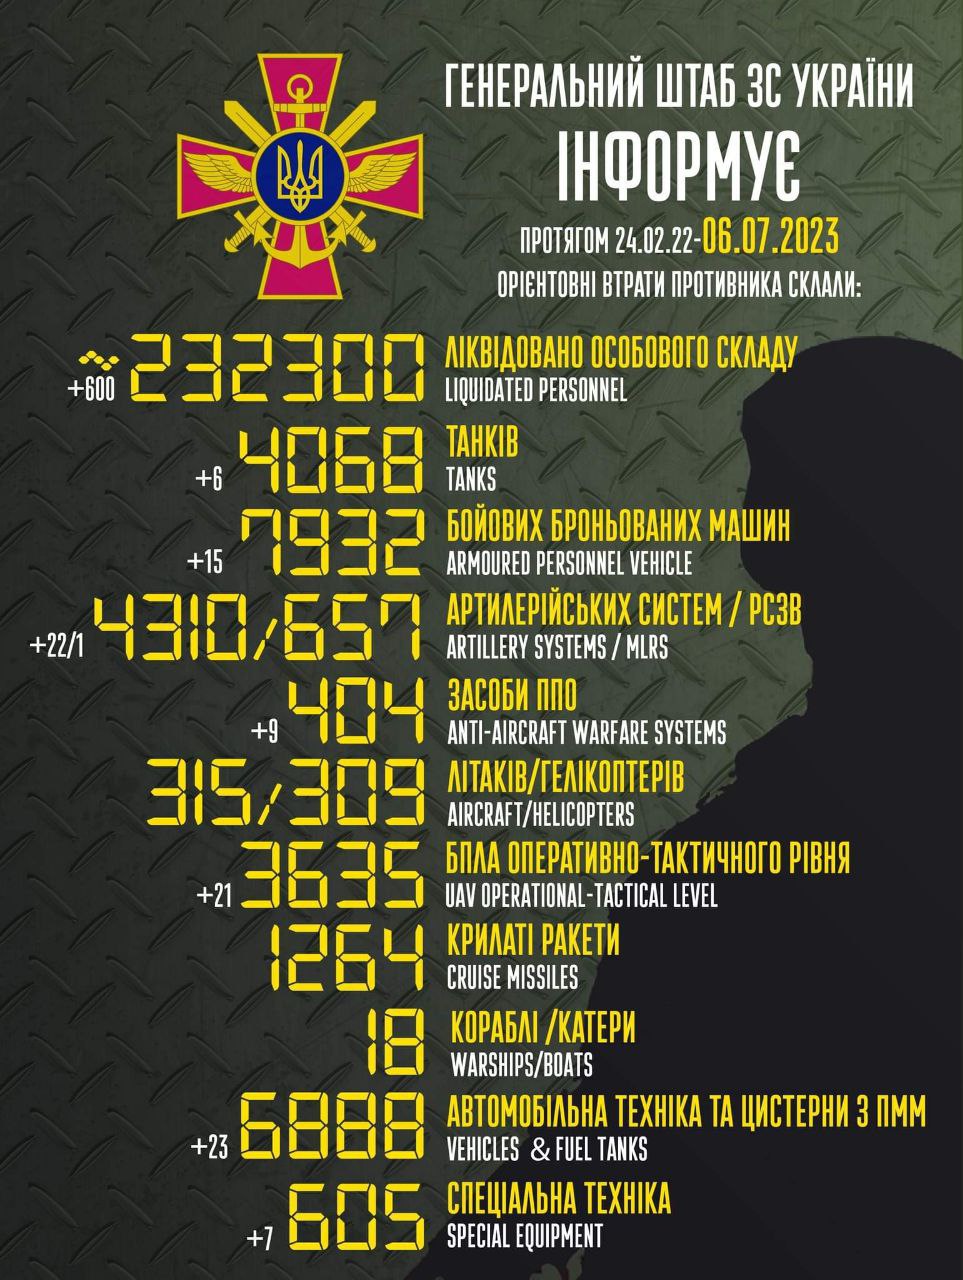 The total combat losses of the enemy from 24.02.2022 to 06.07.2023